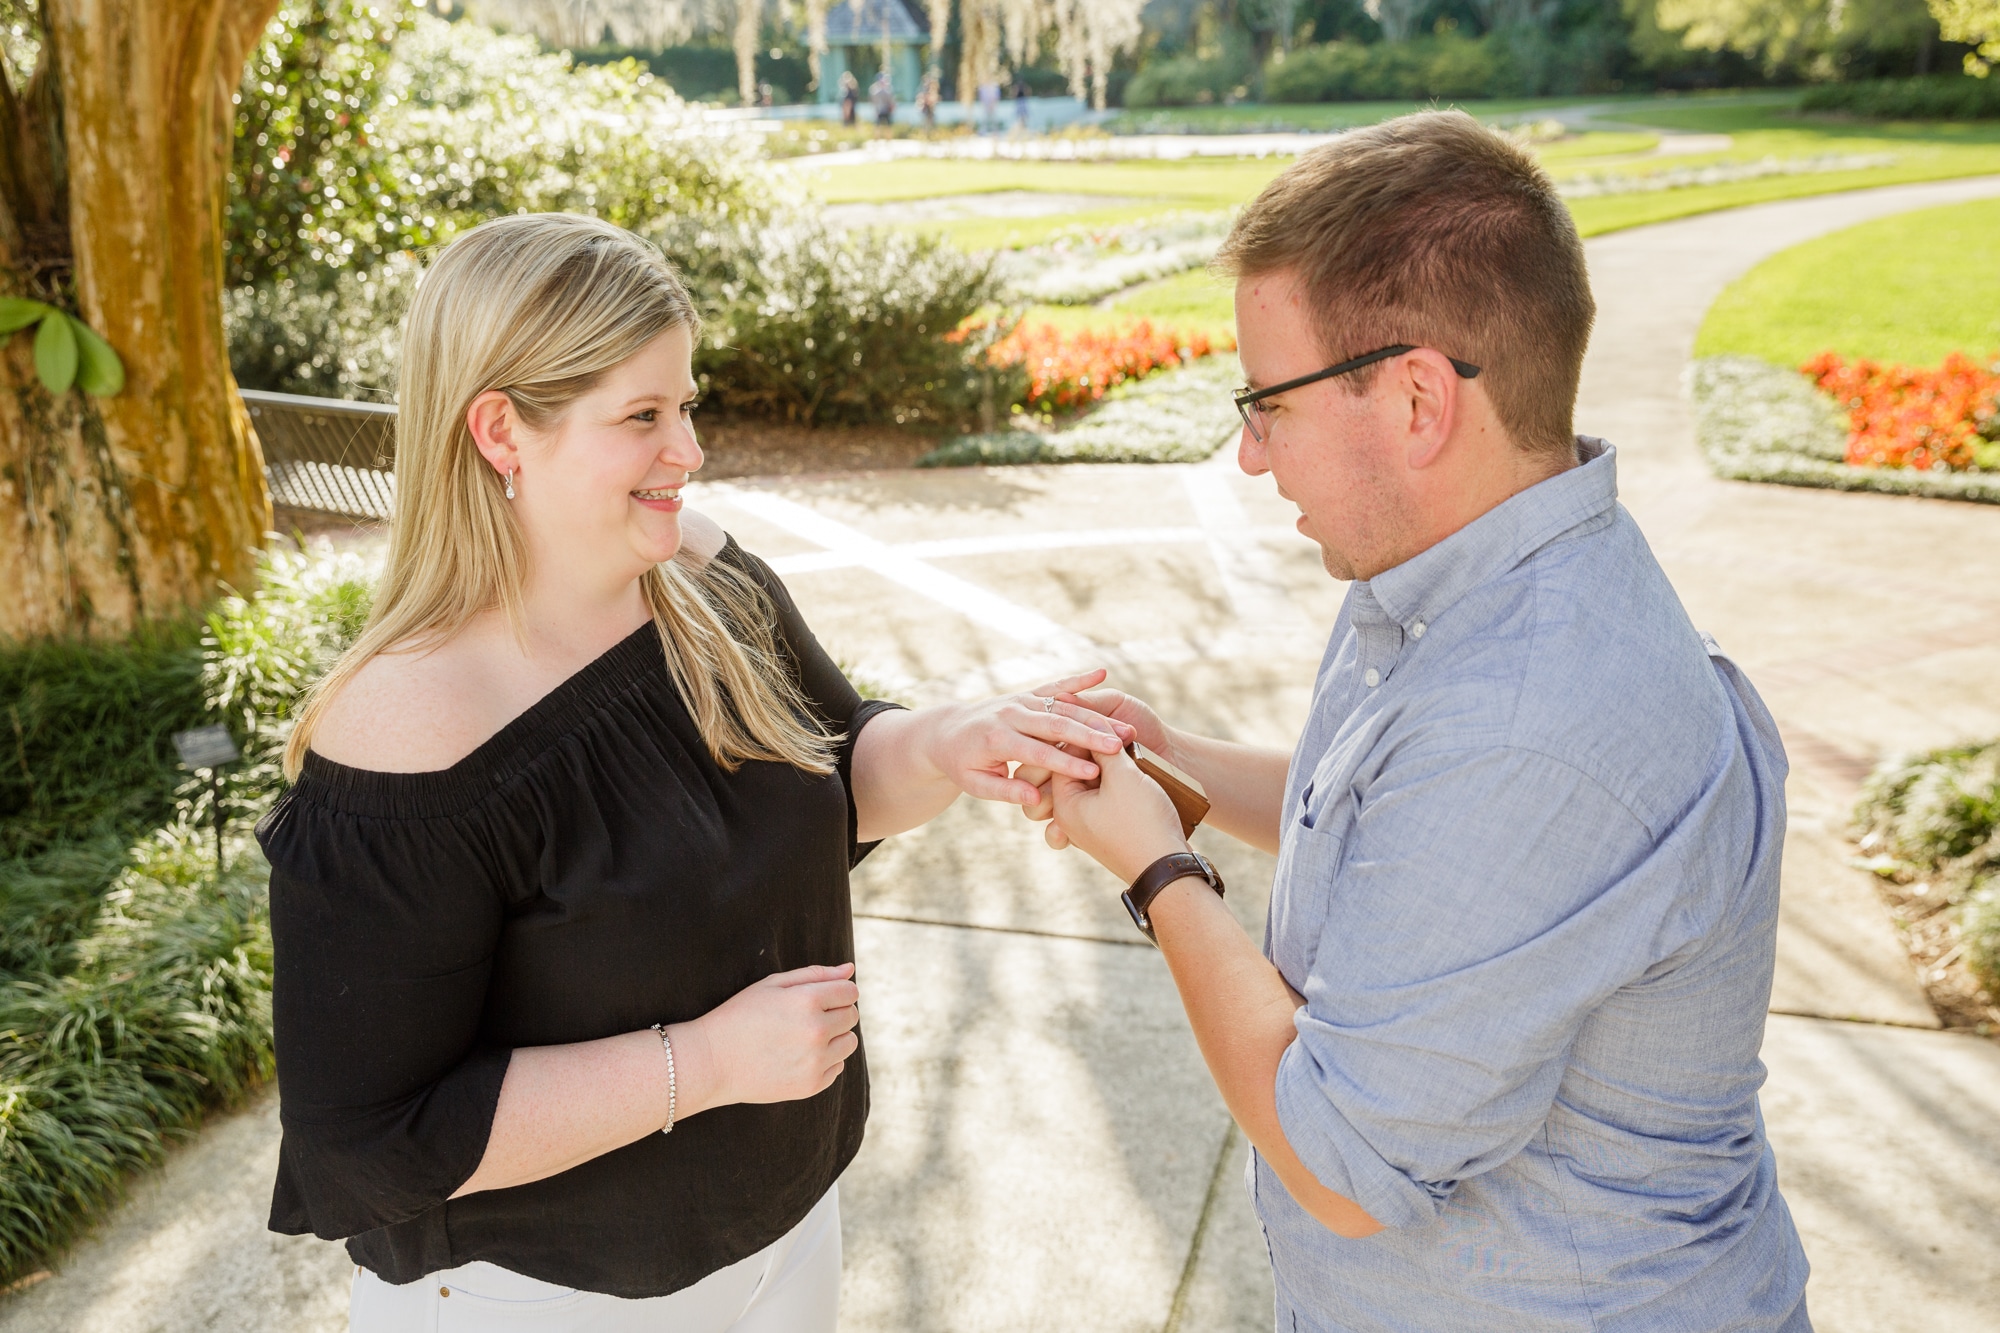 engaged couple stand outside while girl smiles and man puts the engagement ring on her finger